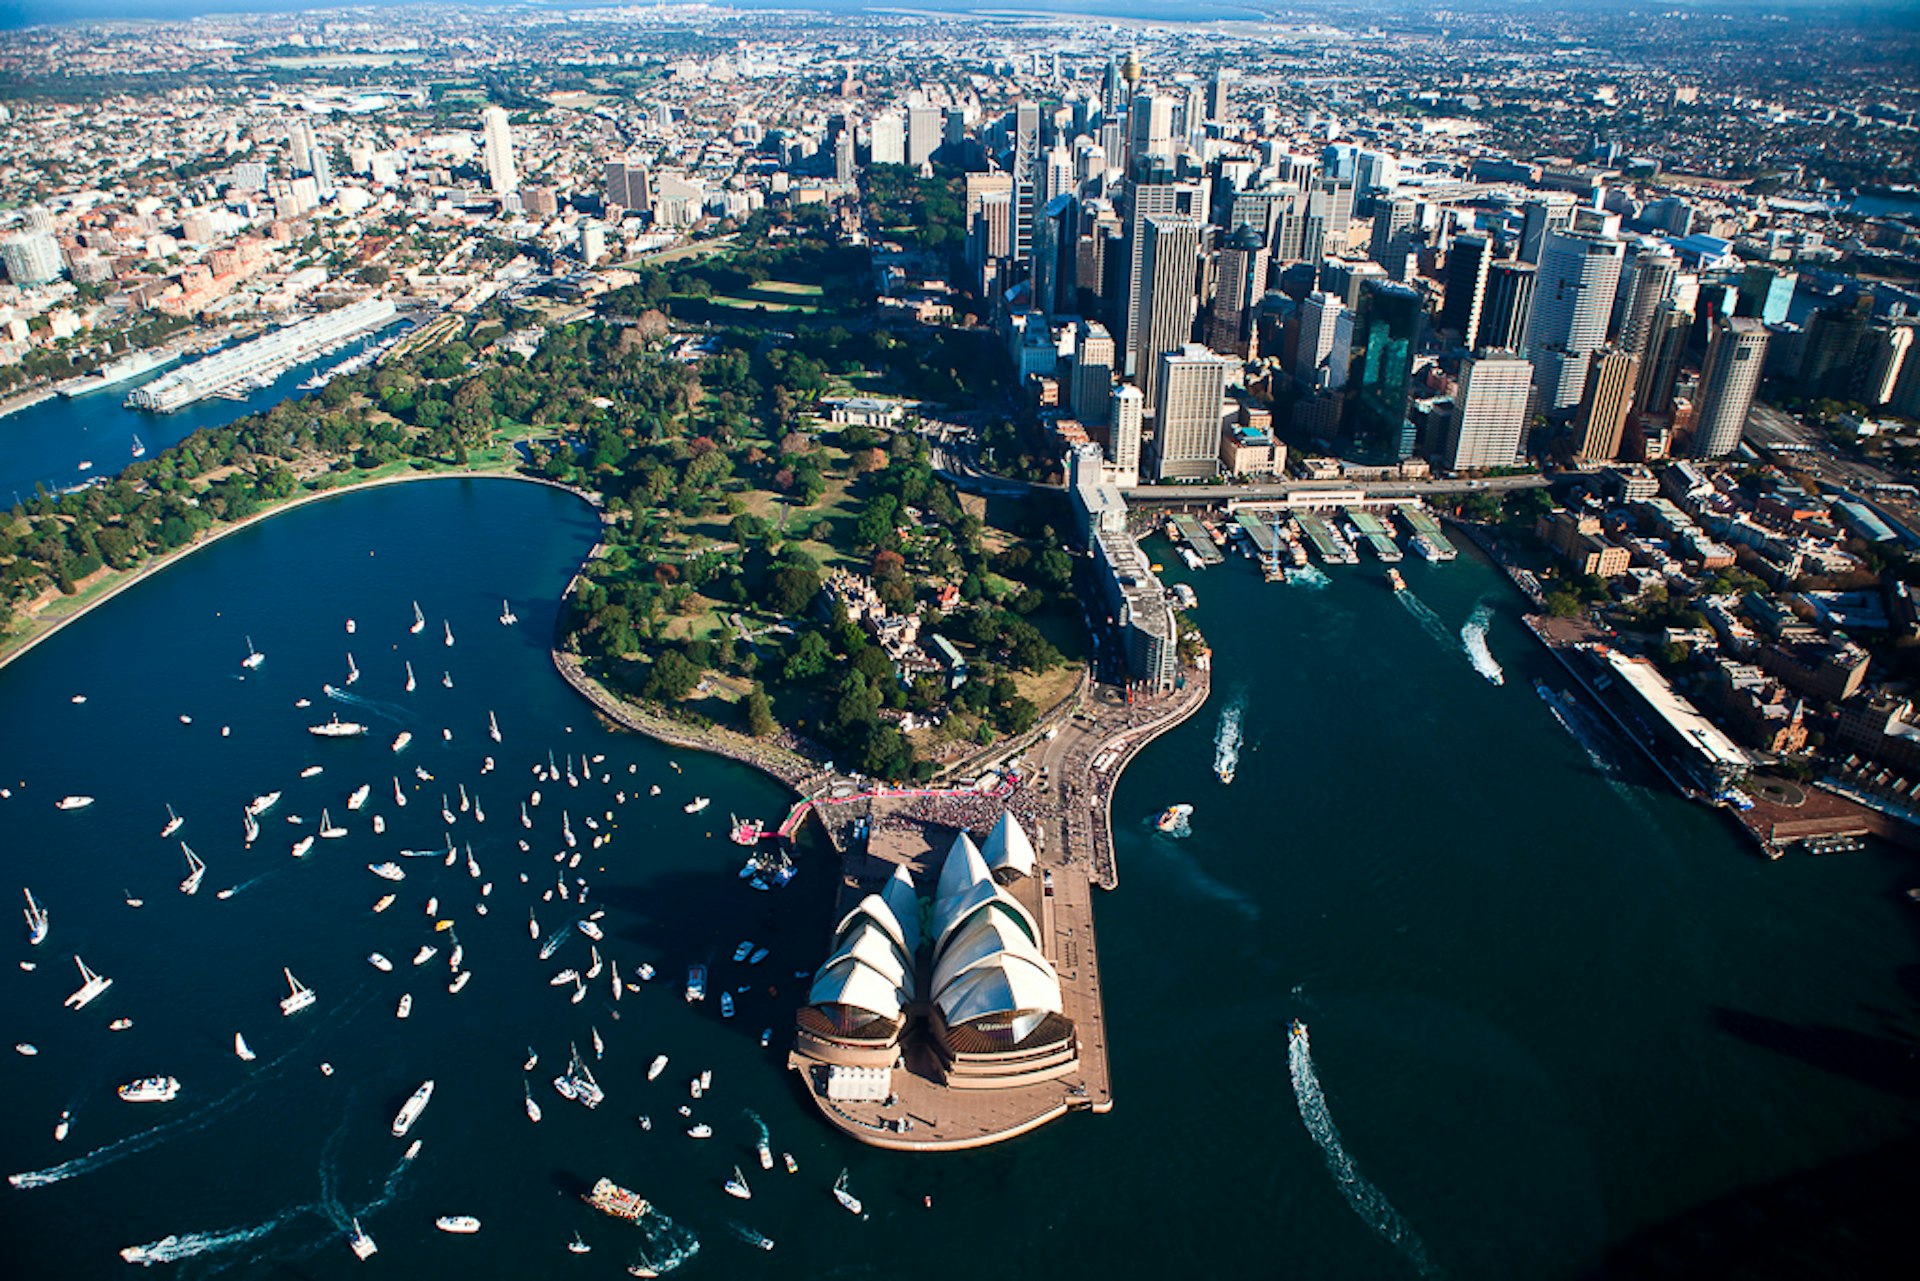 Bennelong Point and the Sydney Opera House from the air. Image by Pavel / CC by 2.0